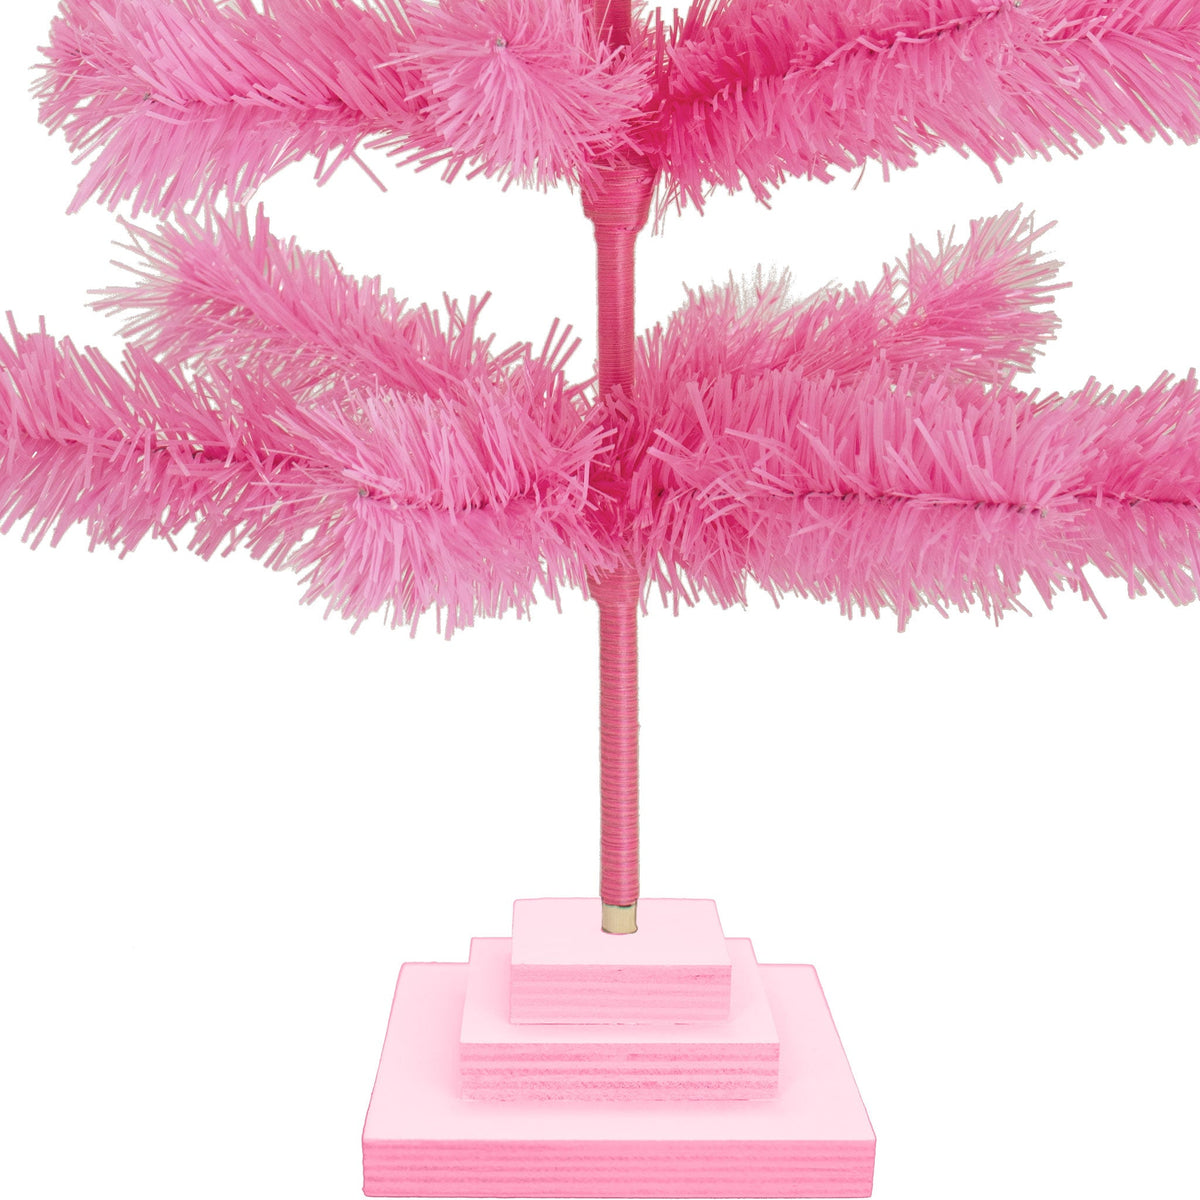 3FT Tall Pink Christmas Trees come with a pink painted wooden triple-tiered base.